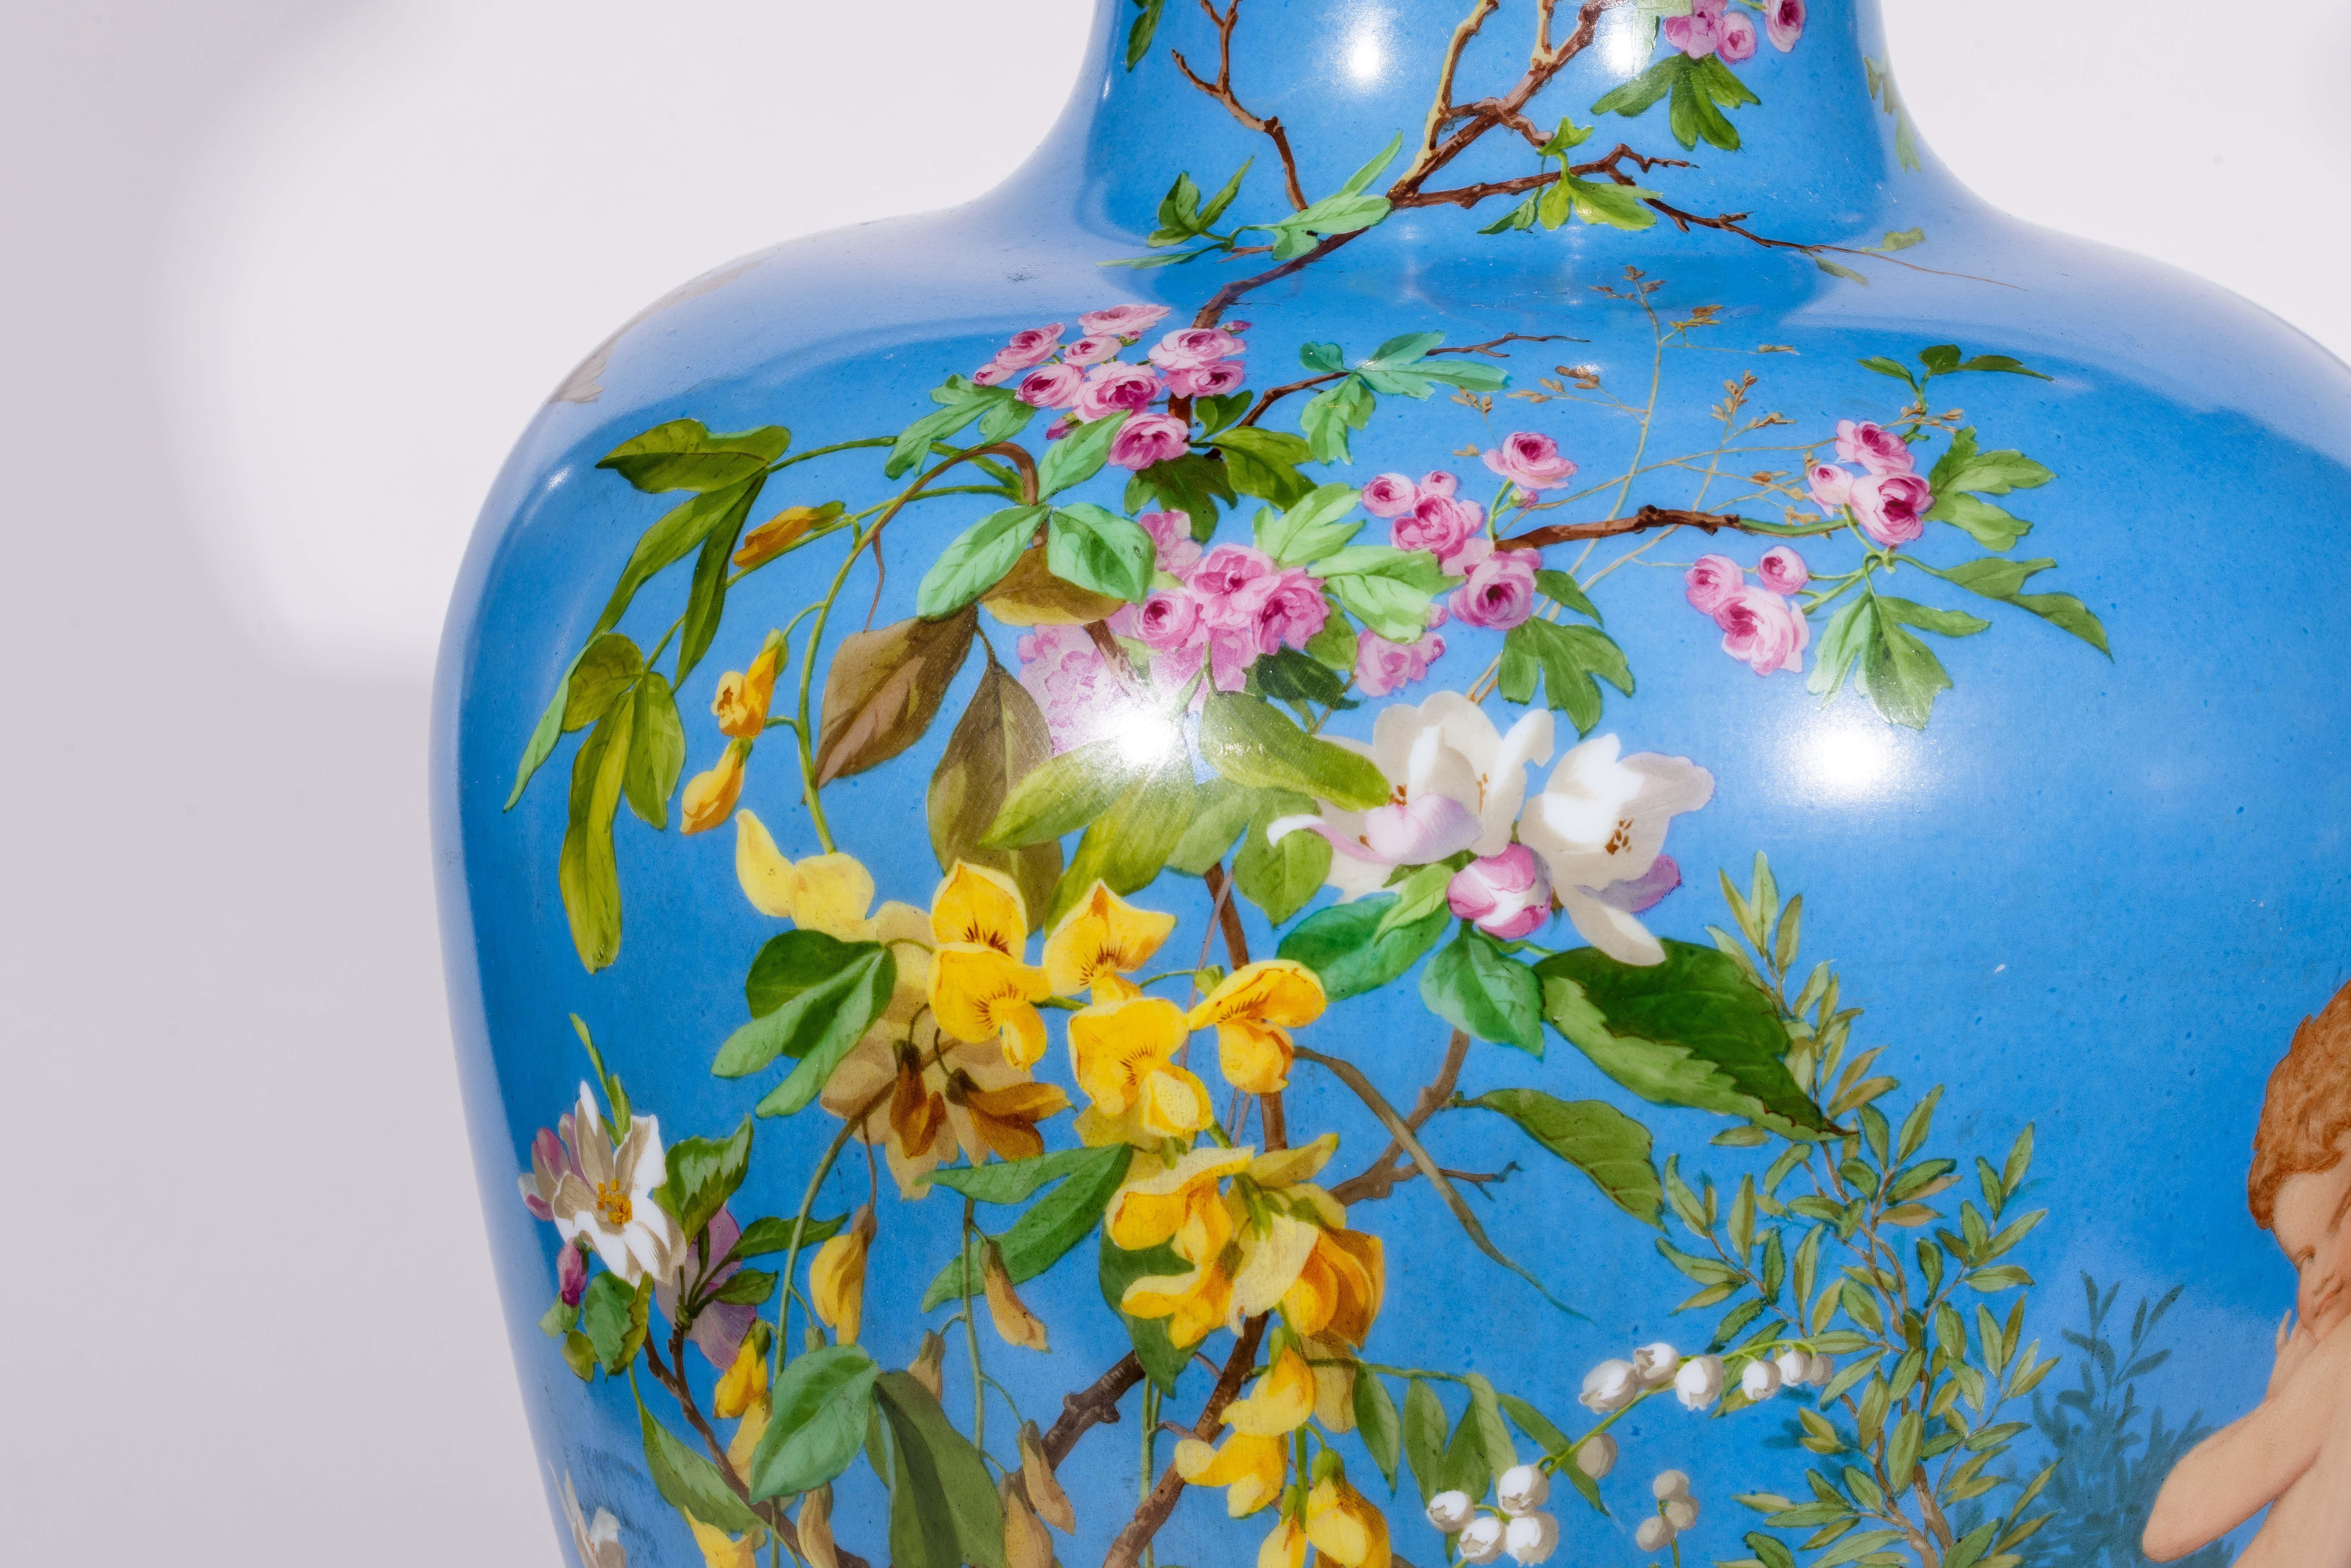 A Large French Baccarat Opaline Glass Hand-Painted 